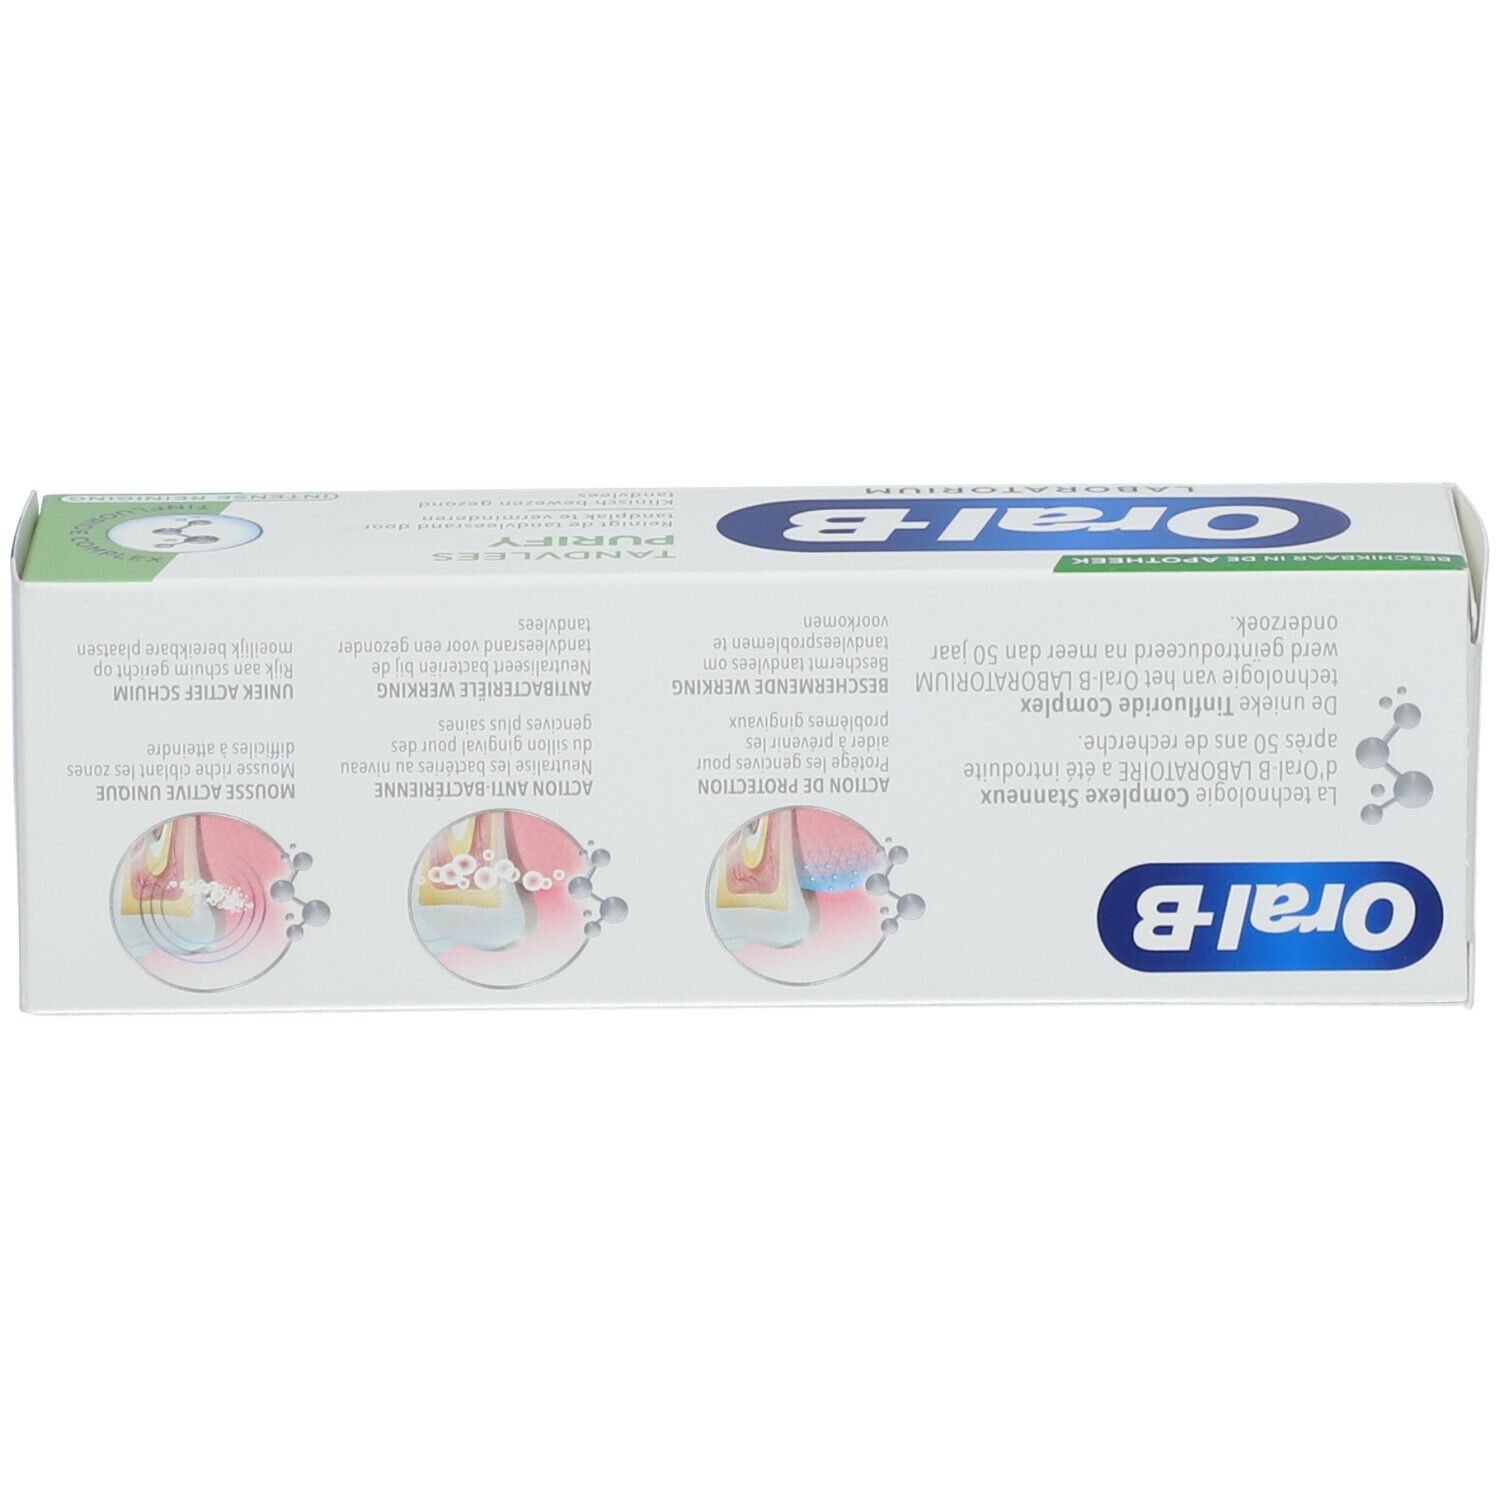 Oral-B GENCIVES PURIFY Dentifrice Nettoyage Intense​